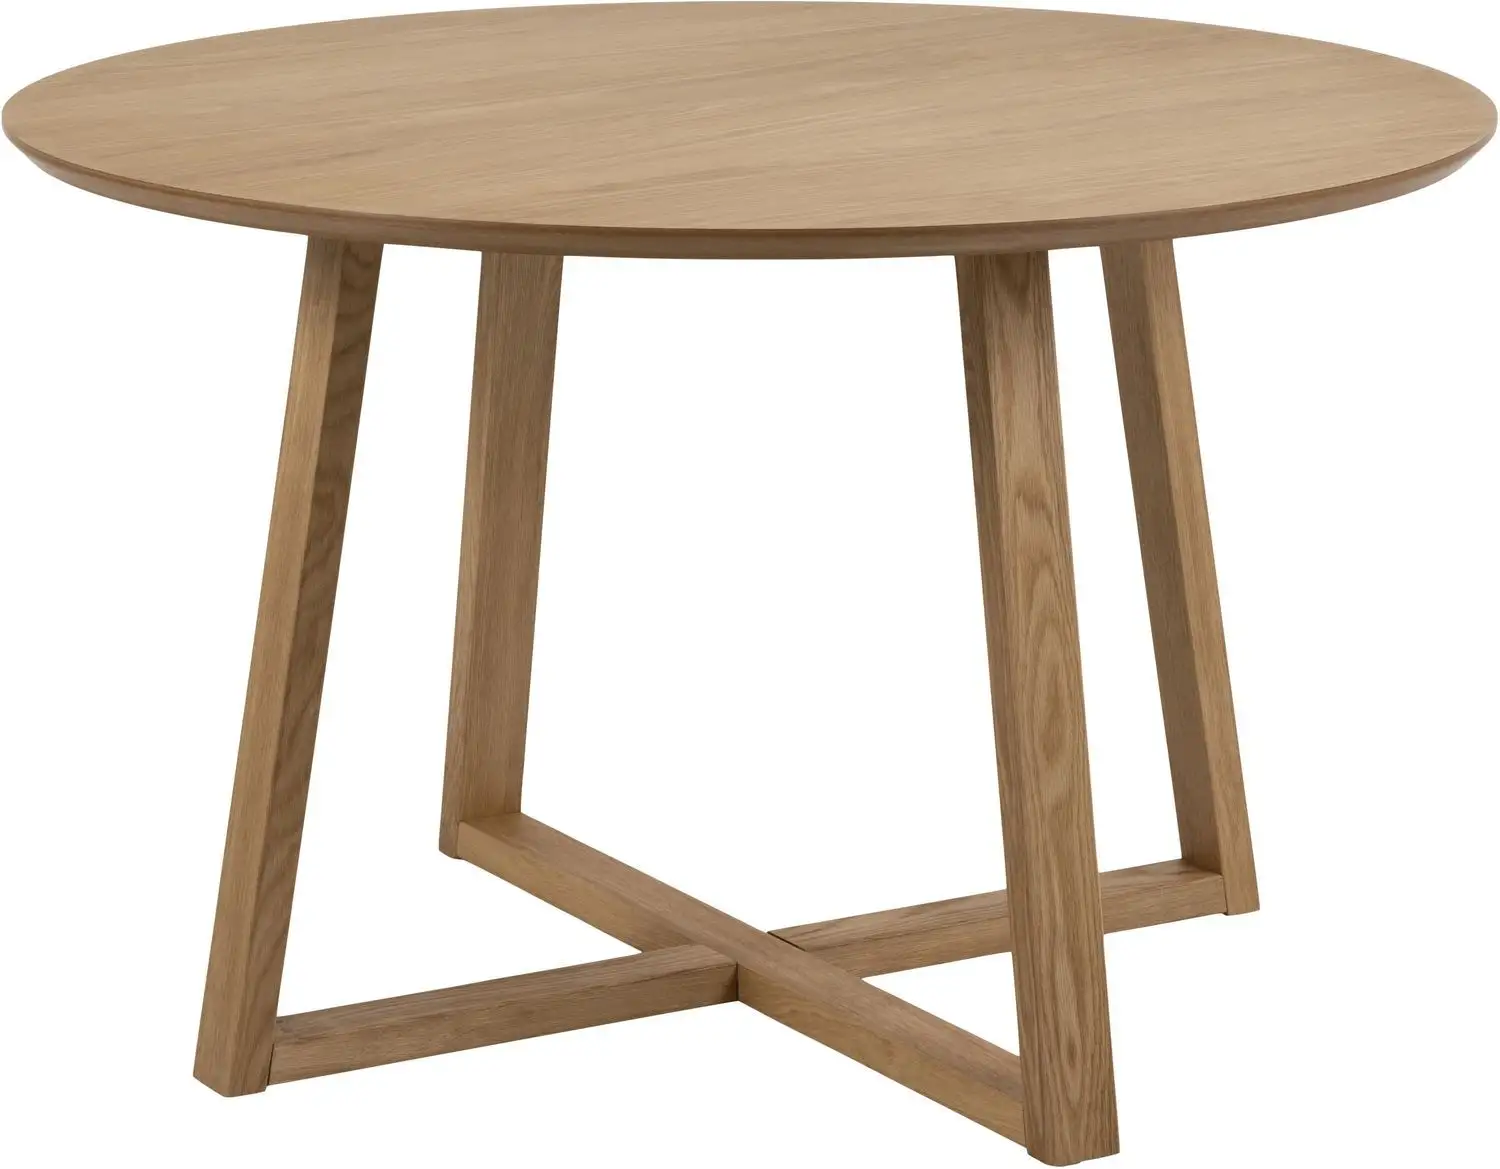 Good Quality Solid Wood Round Dining Table Natural Color Modern Style for Home Restaurant Dining Table